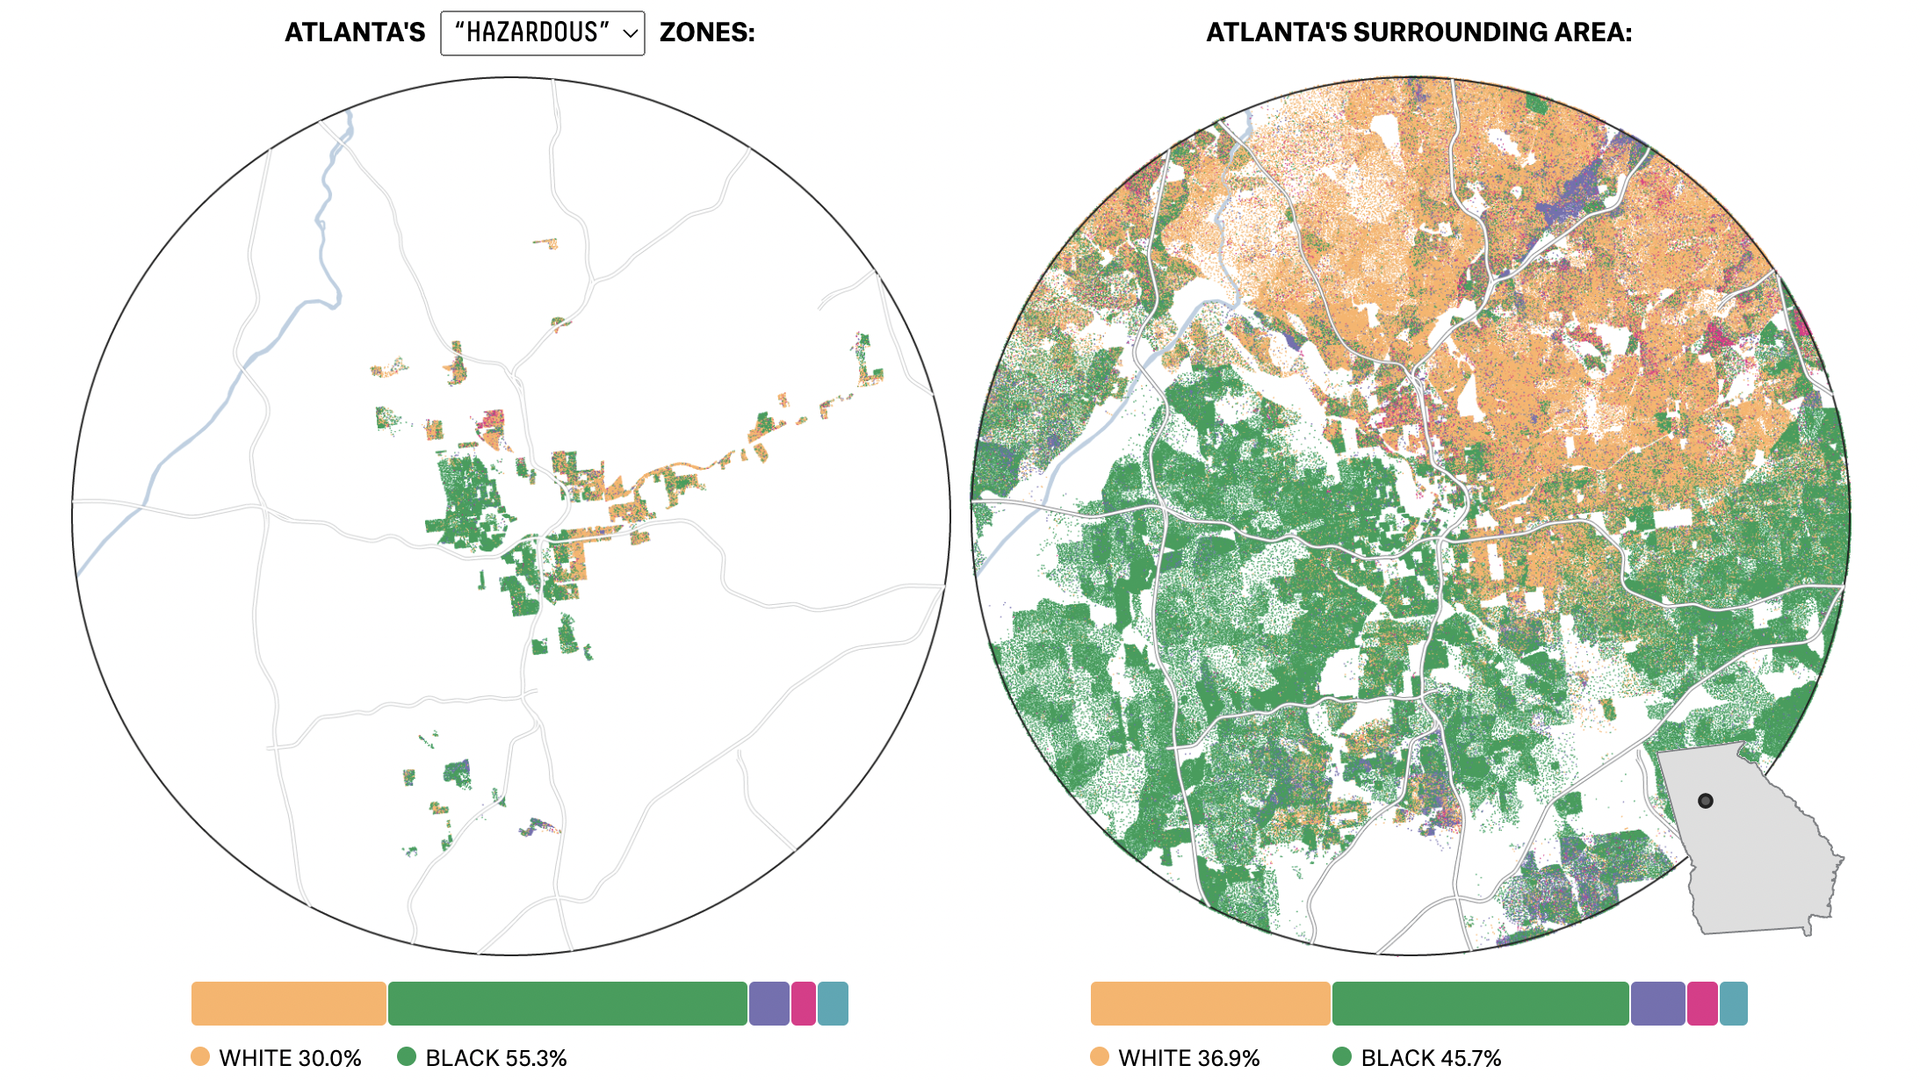 A side-by-side comparison of redlined areas in Atlanta compared to the map of today